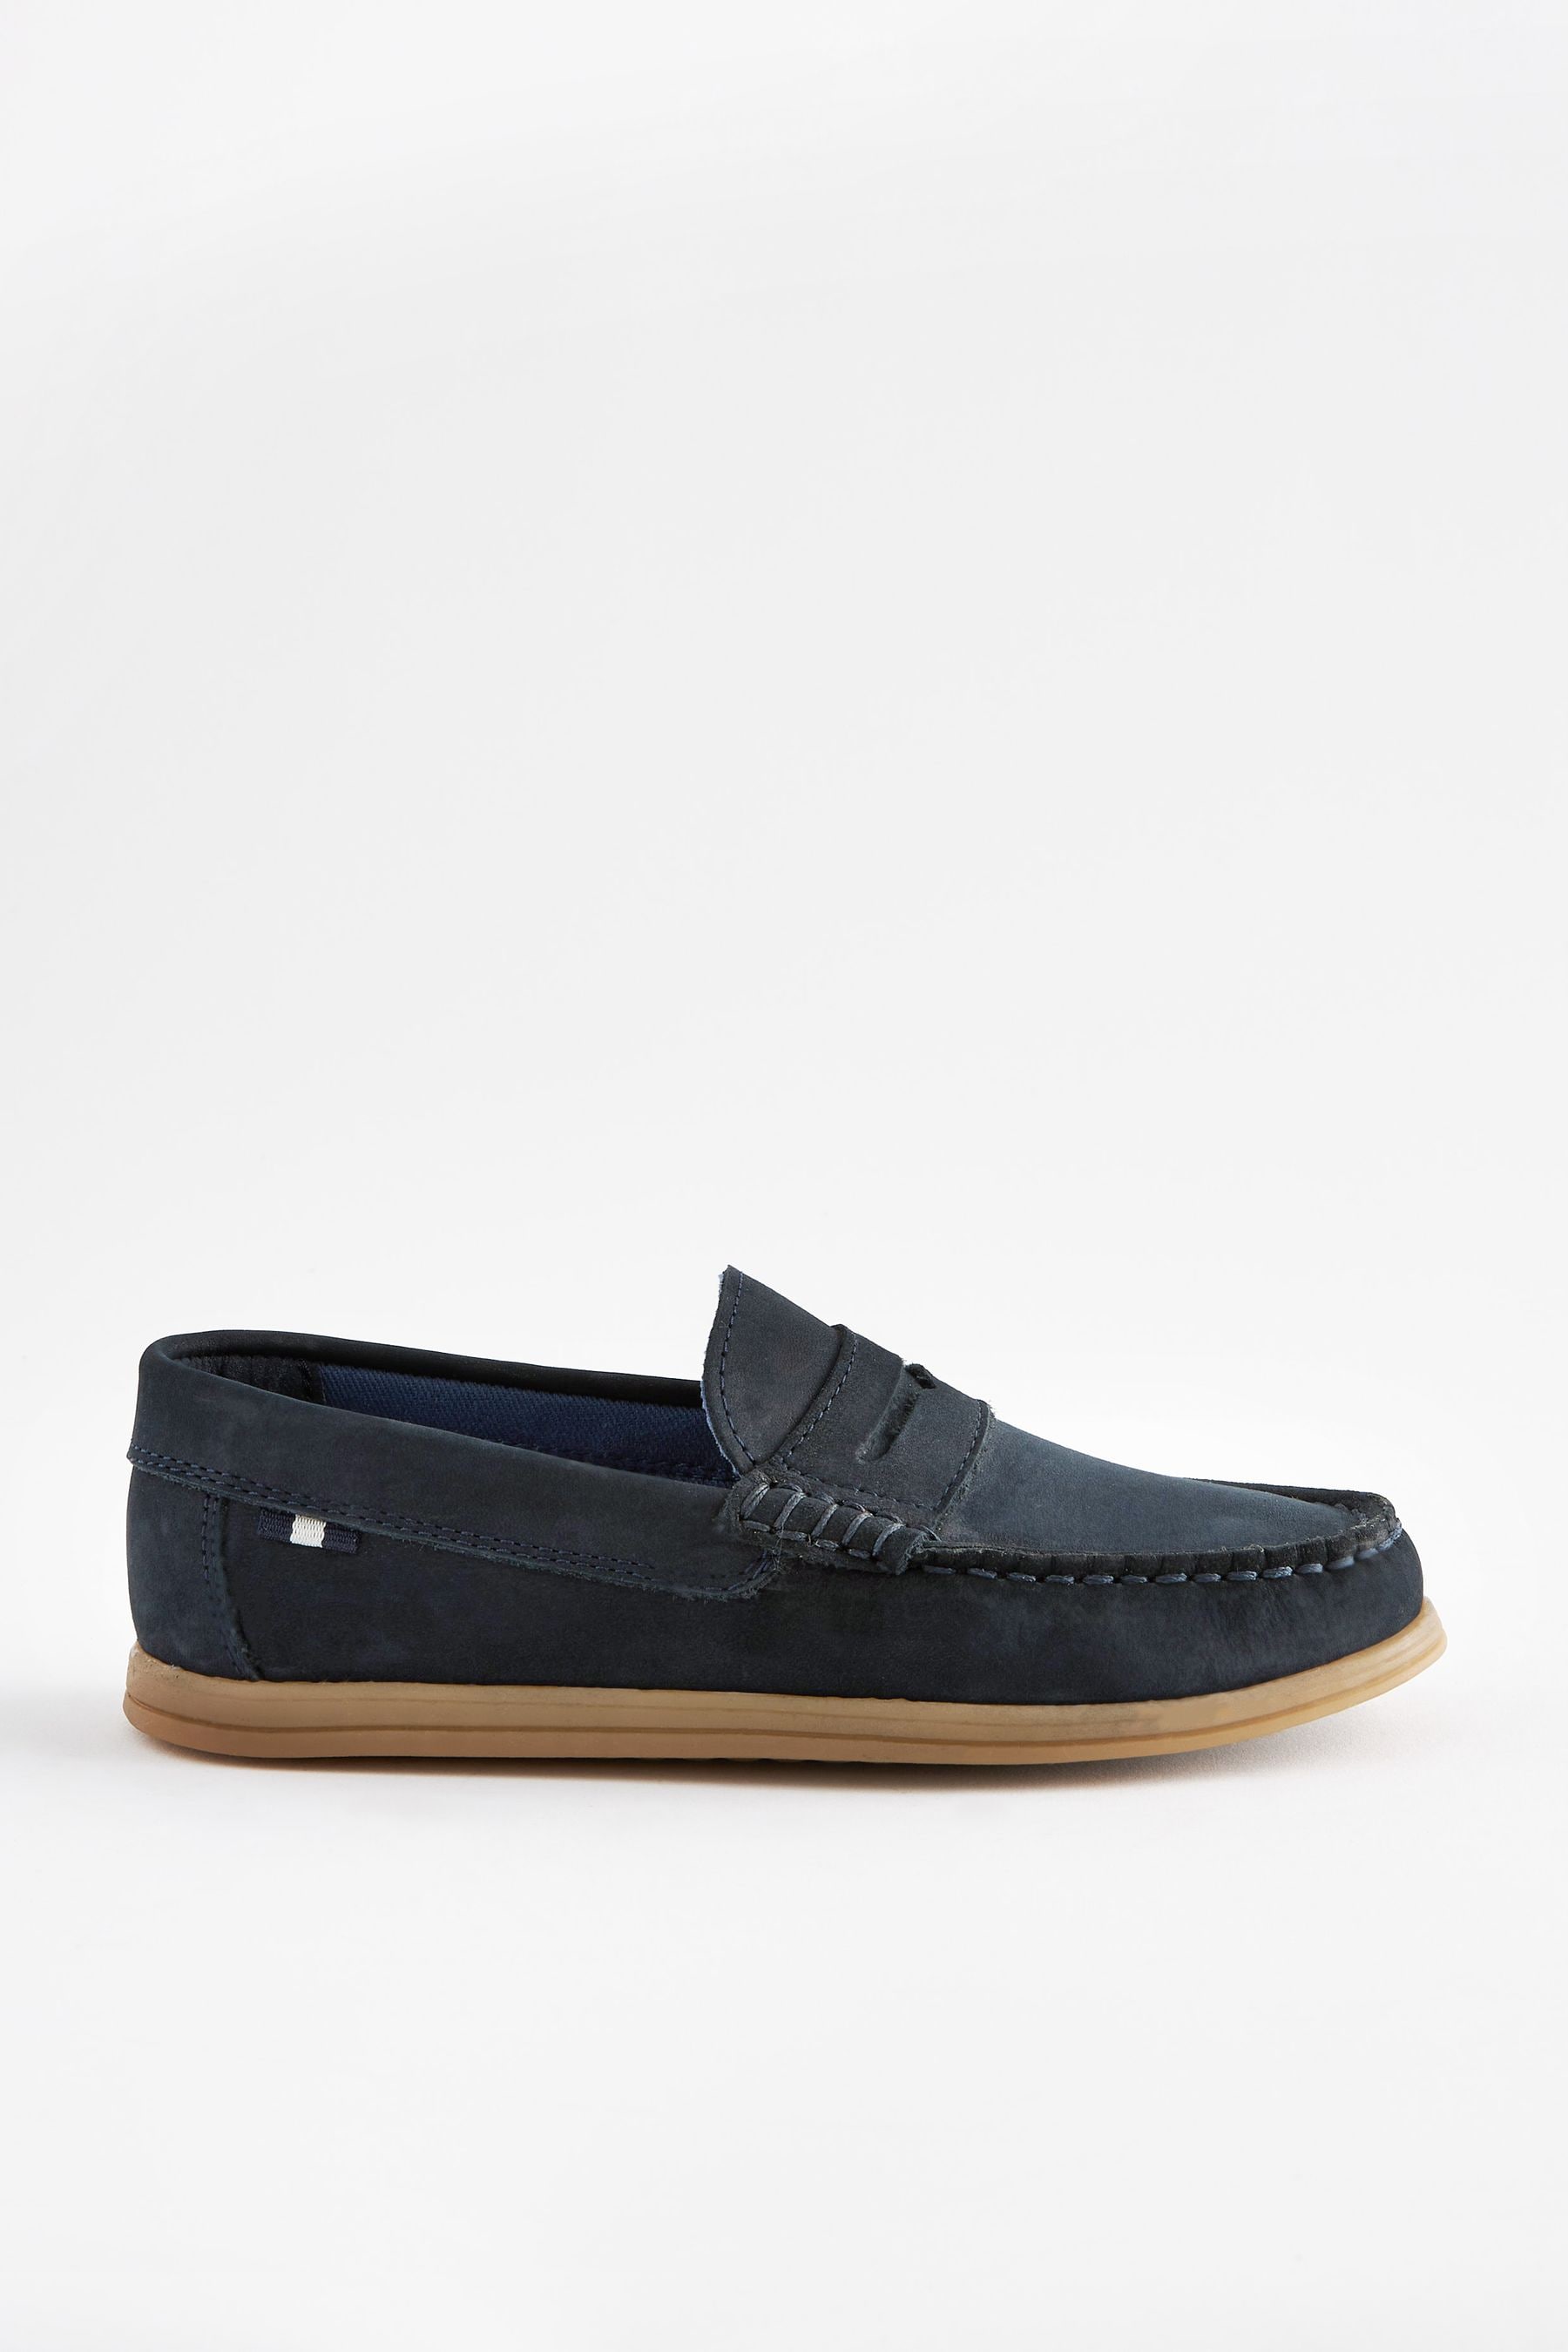 Buy Navy Blue Leather Slip-On Penny Loafers from the Next UK online shop